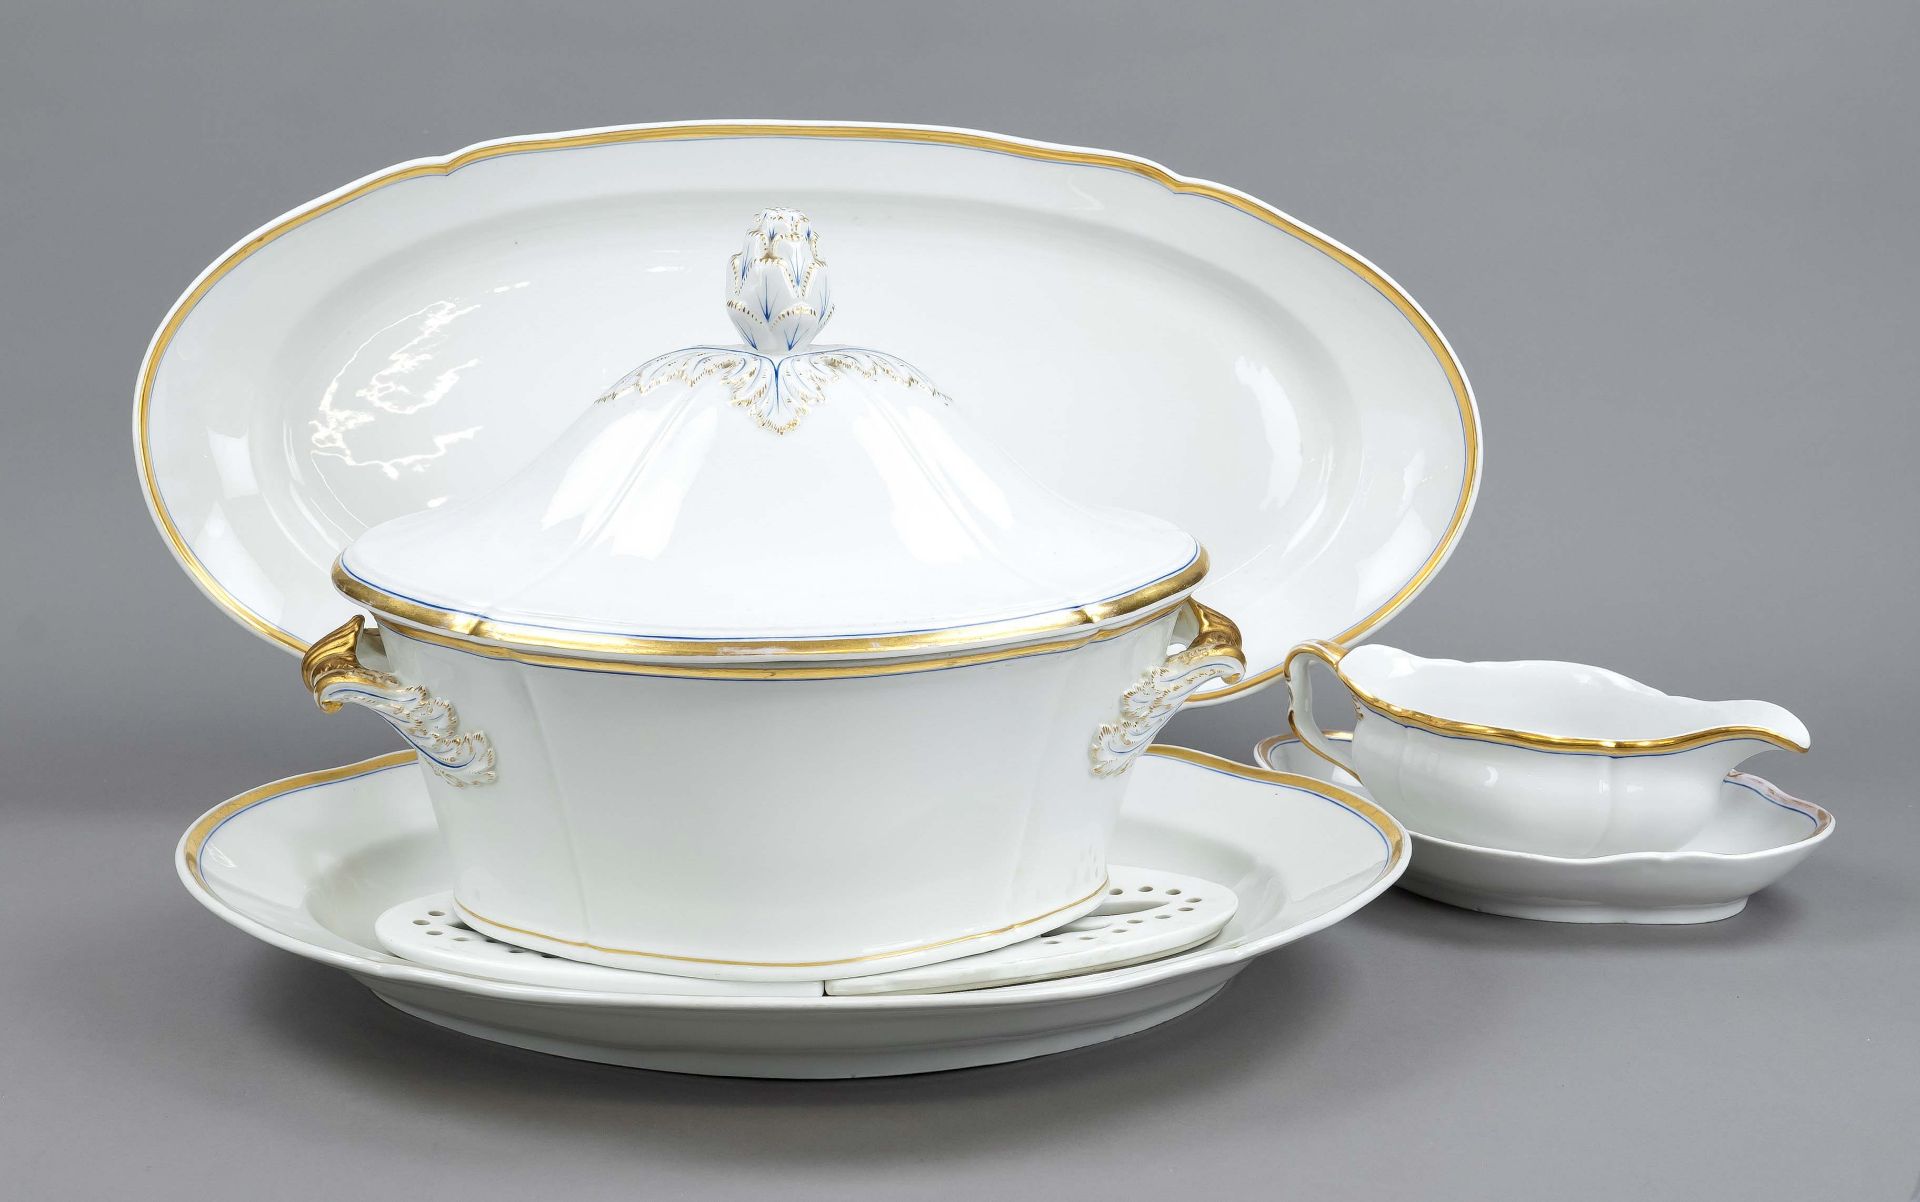 Large dinner service, 65 pcs, KPM Berlin, small penny mark, (1849-70), partly with red imperial